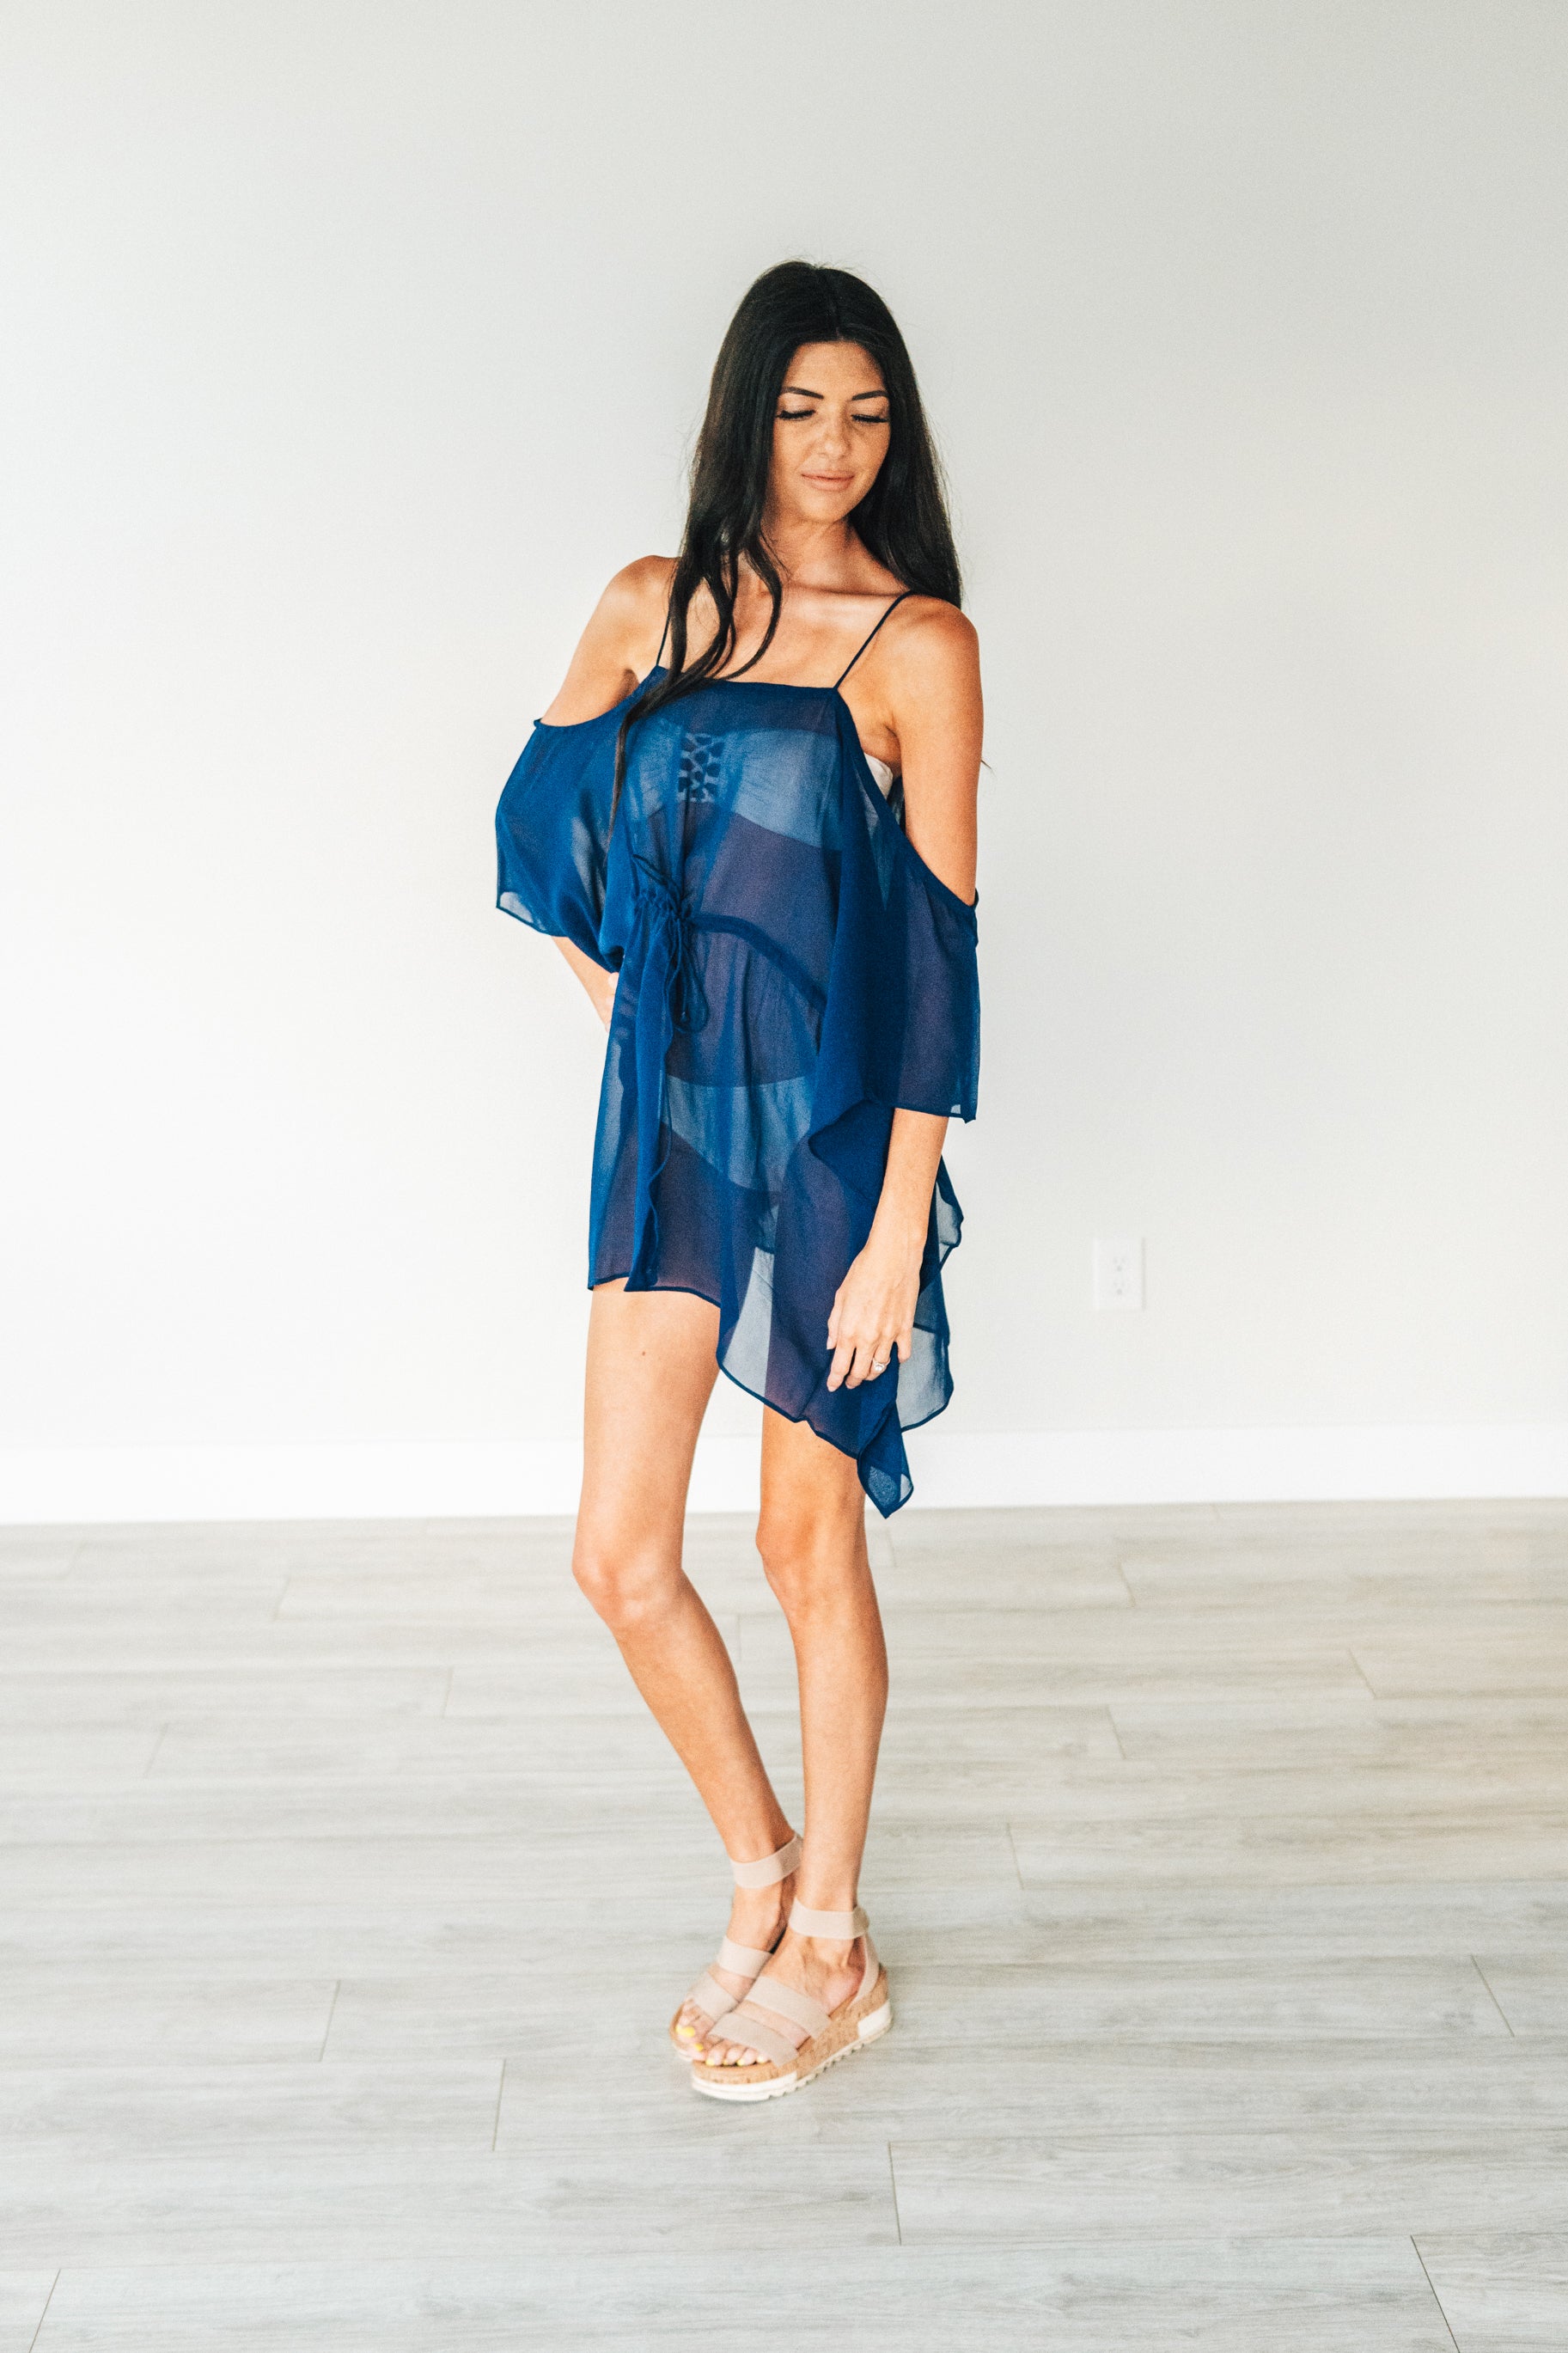 Sheer Beach Cover Up, Cold Shoulder Tunic Top, Bikini Cover Up, Bathing Suit cover Up, Chiffon Sheer Dress, Pool Party Dress